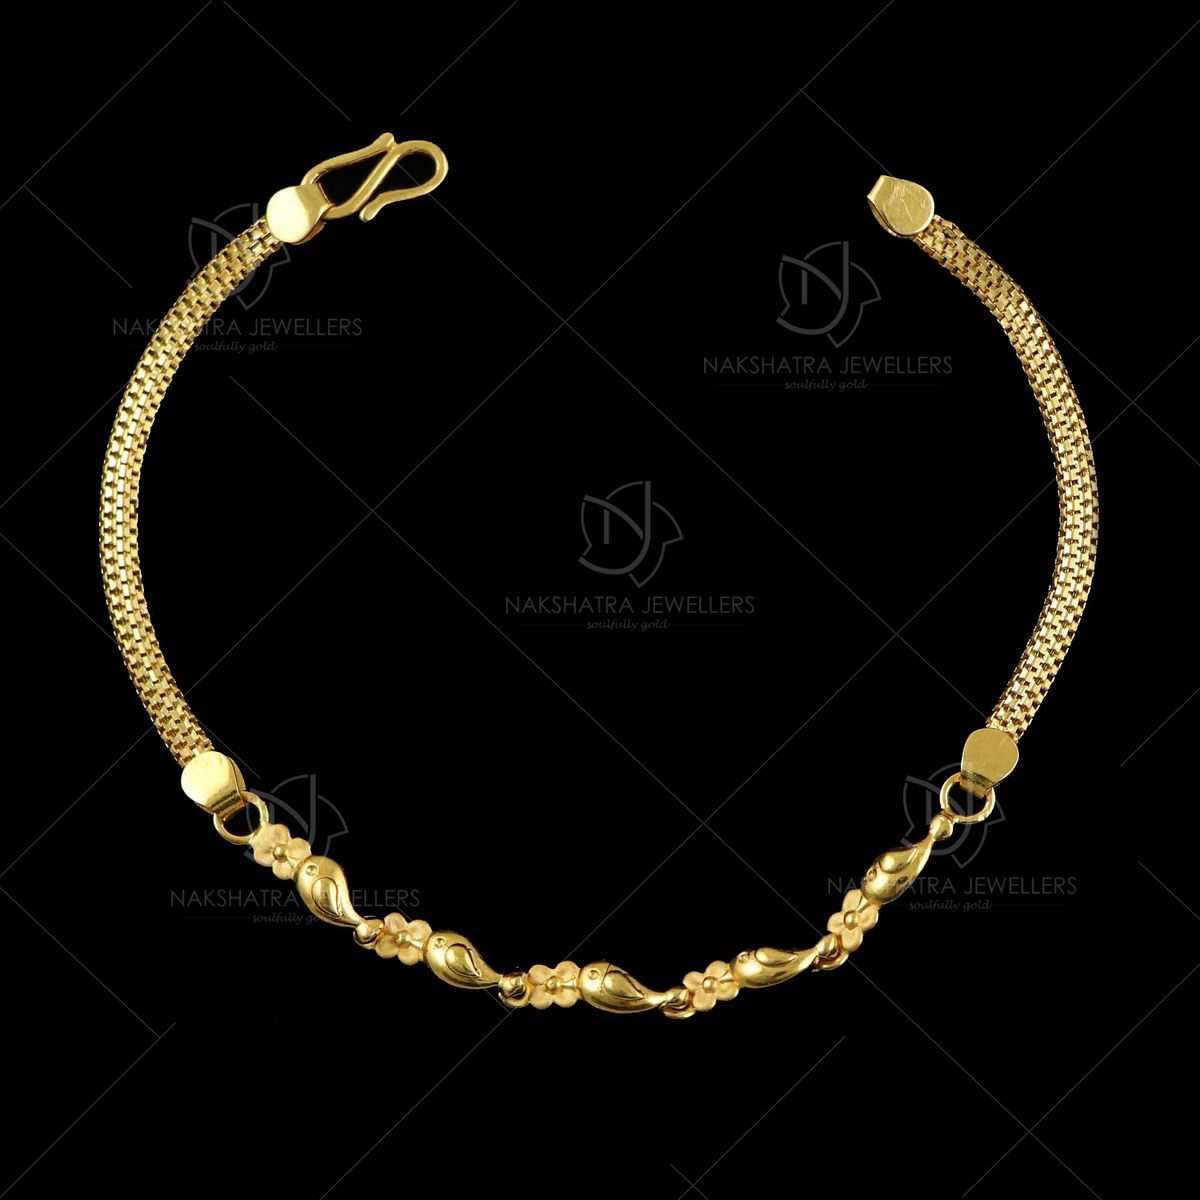 Real 14kt Yellow Gold Oval Design Chain Bracelet; 7.25 inch | eBay